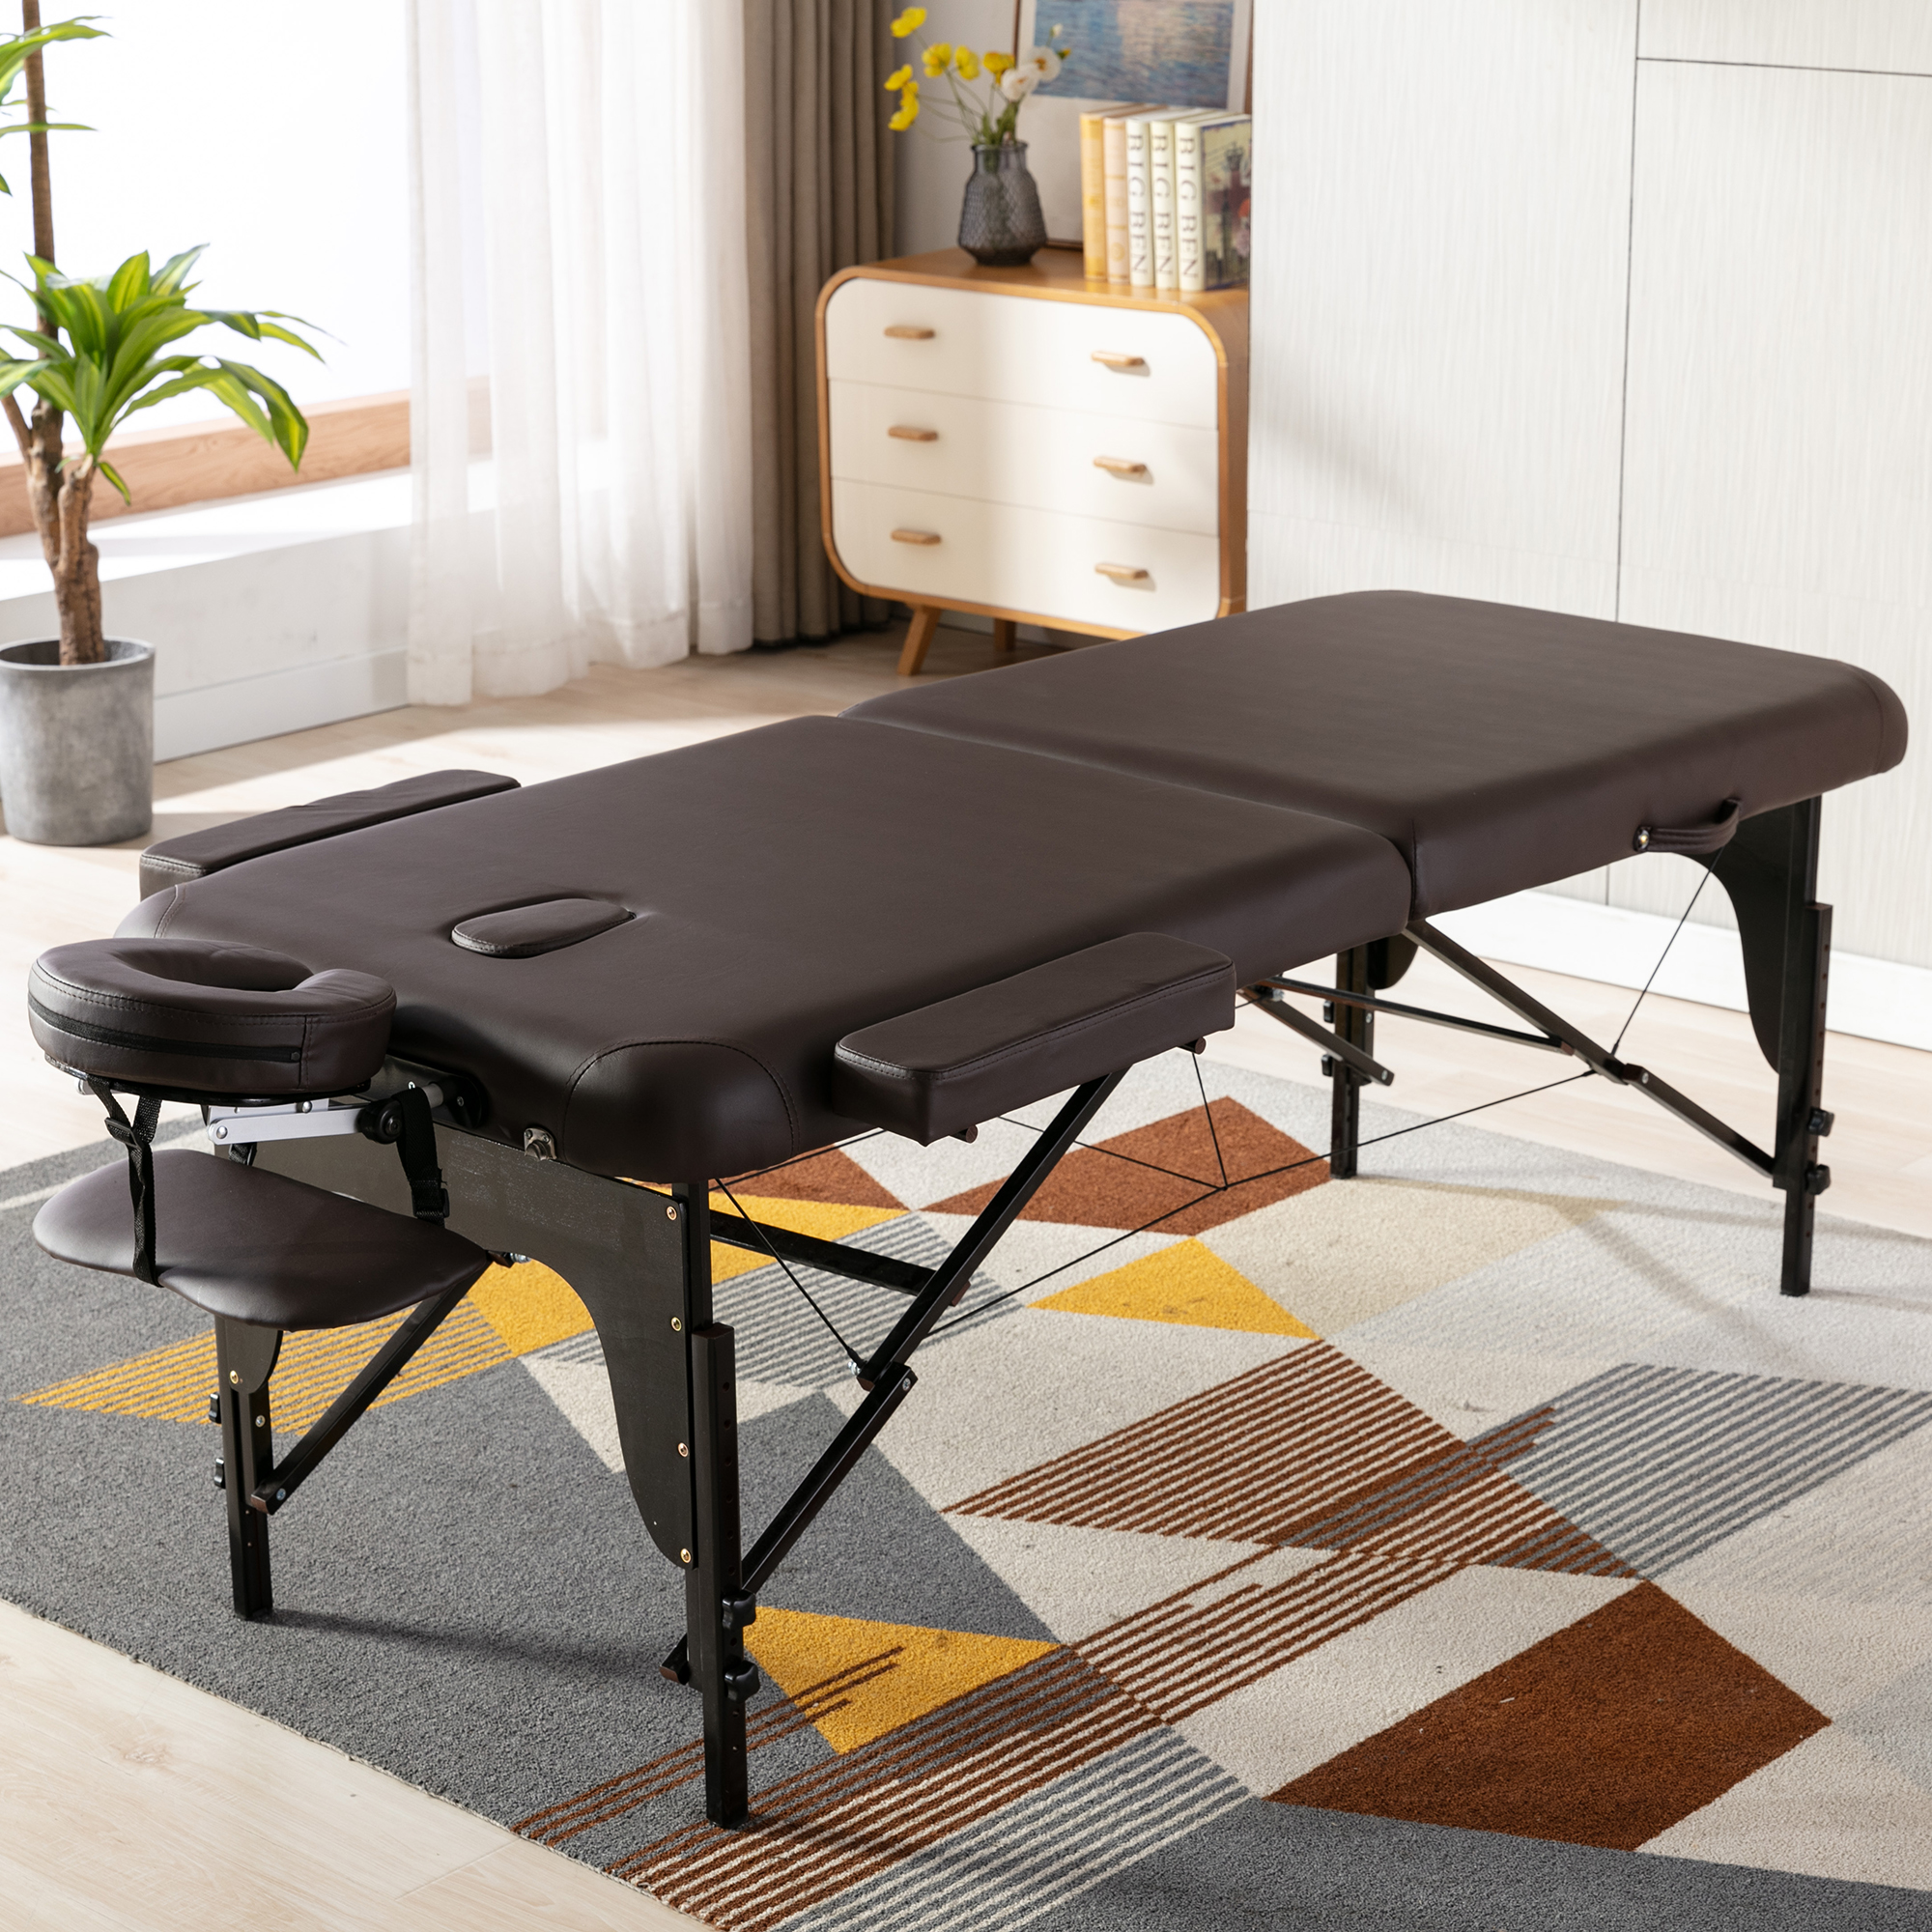 Portable Massage table 29 Inchs Wide PU leather，2 Section Wooden Adjustable Folding Massage Bed With Carrying Case